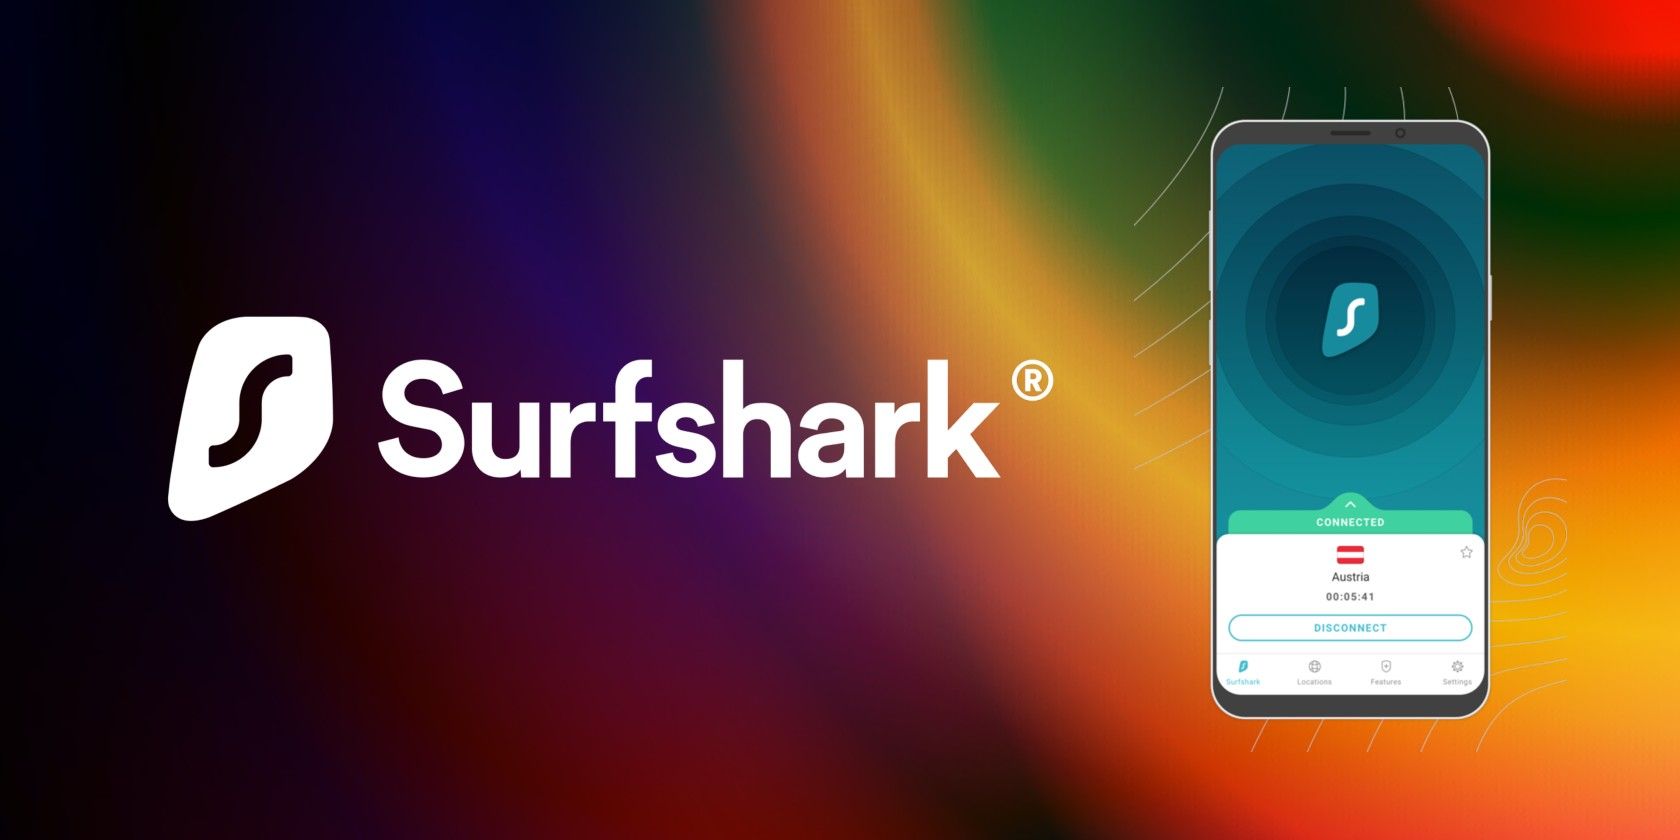 Your surfshark subscription has expired